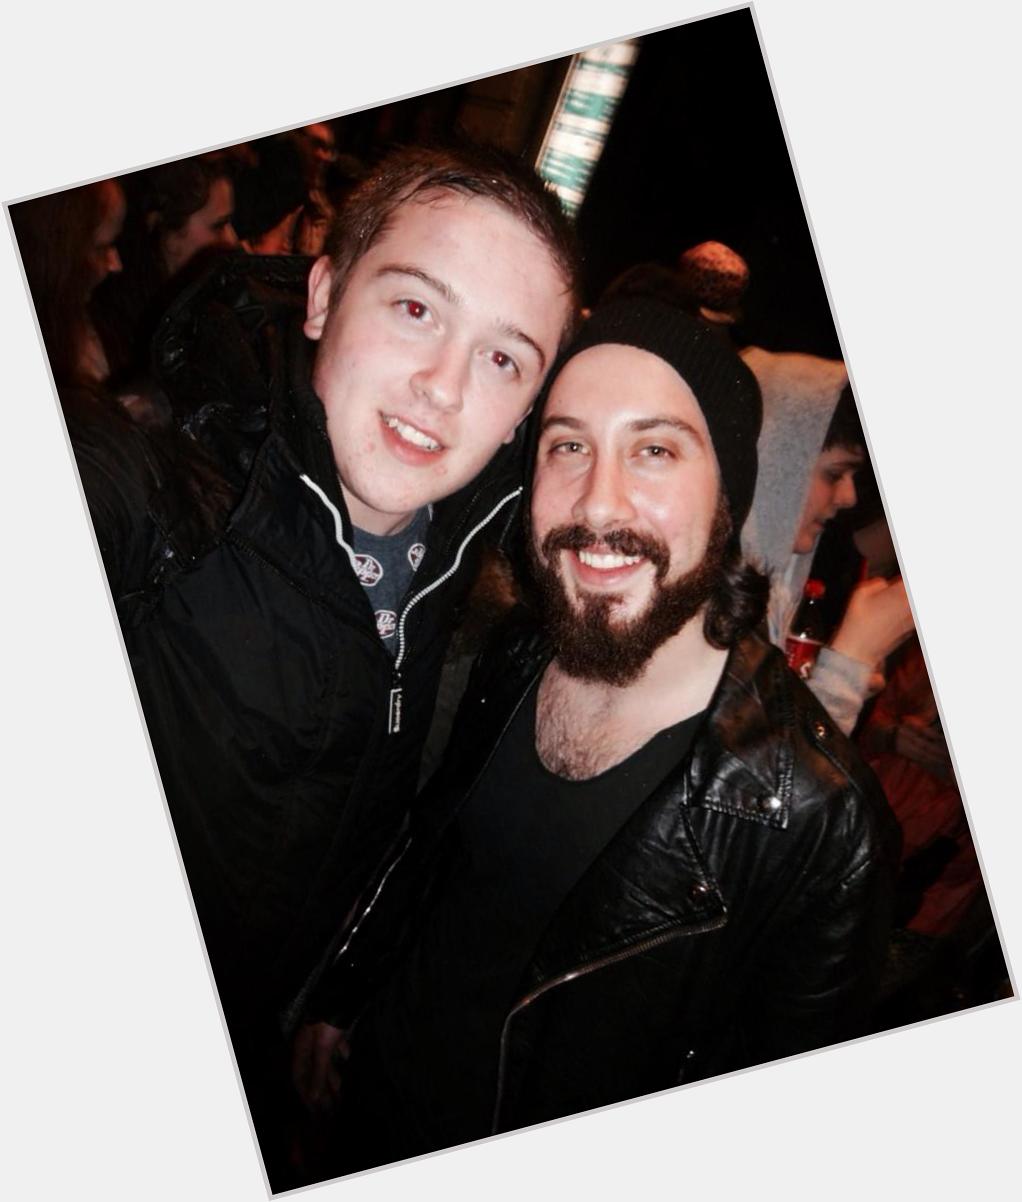  HAPPY BIRTHDAY AVI, HERE IS A TB TO DUBLIN, THANK U FOR BEING AN AMAZING ROLE MODEL AND INSPIRATION  